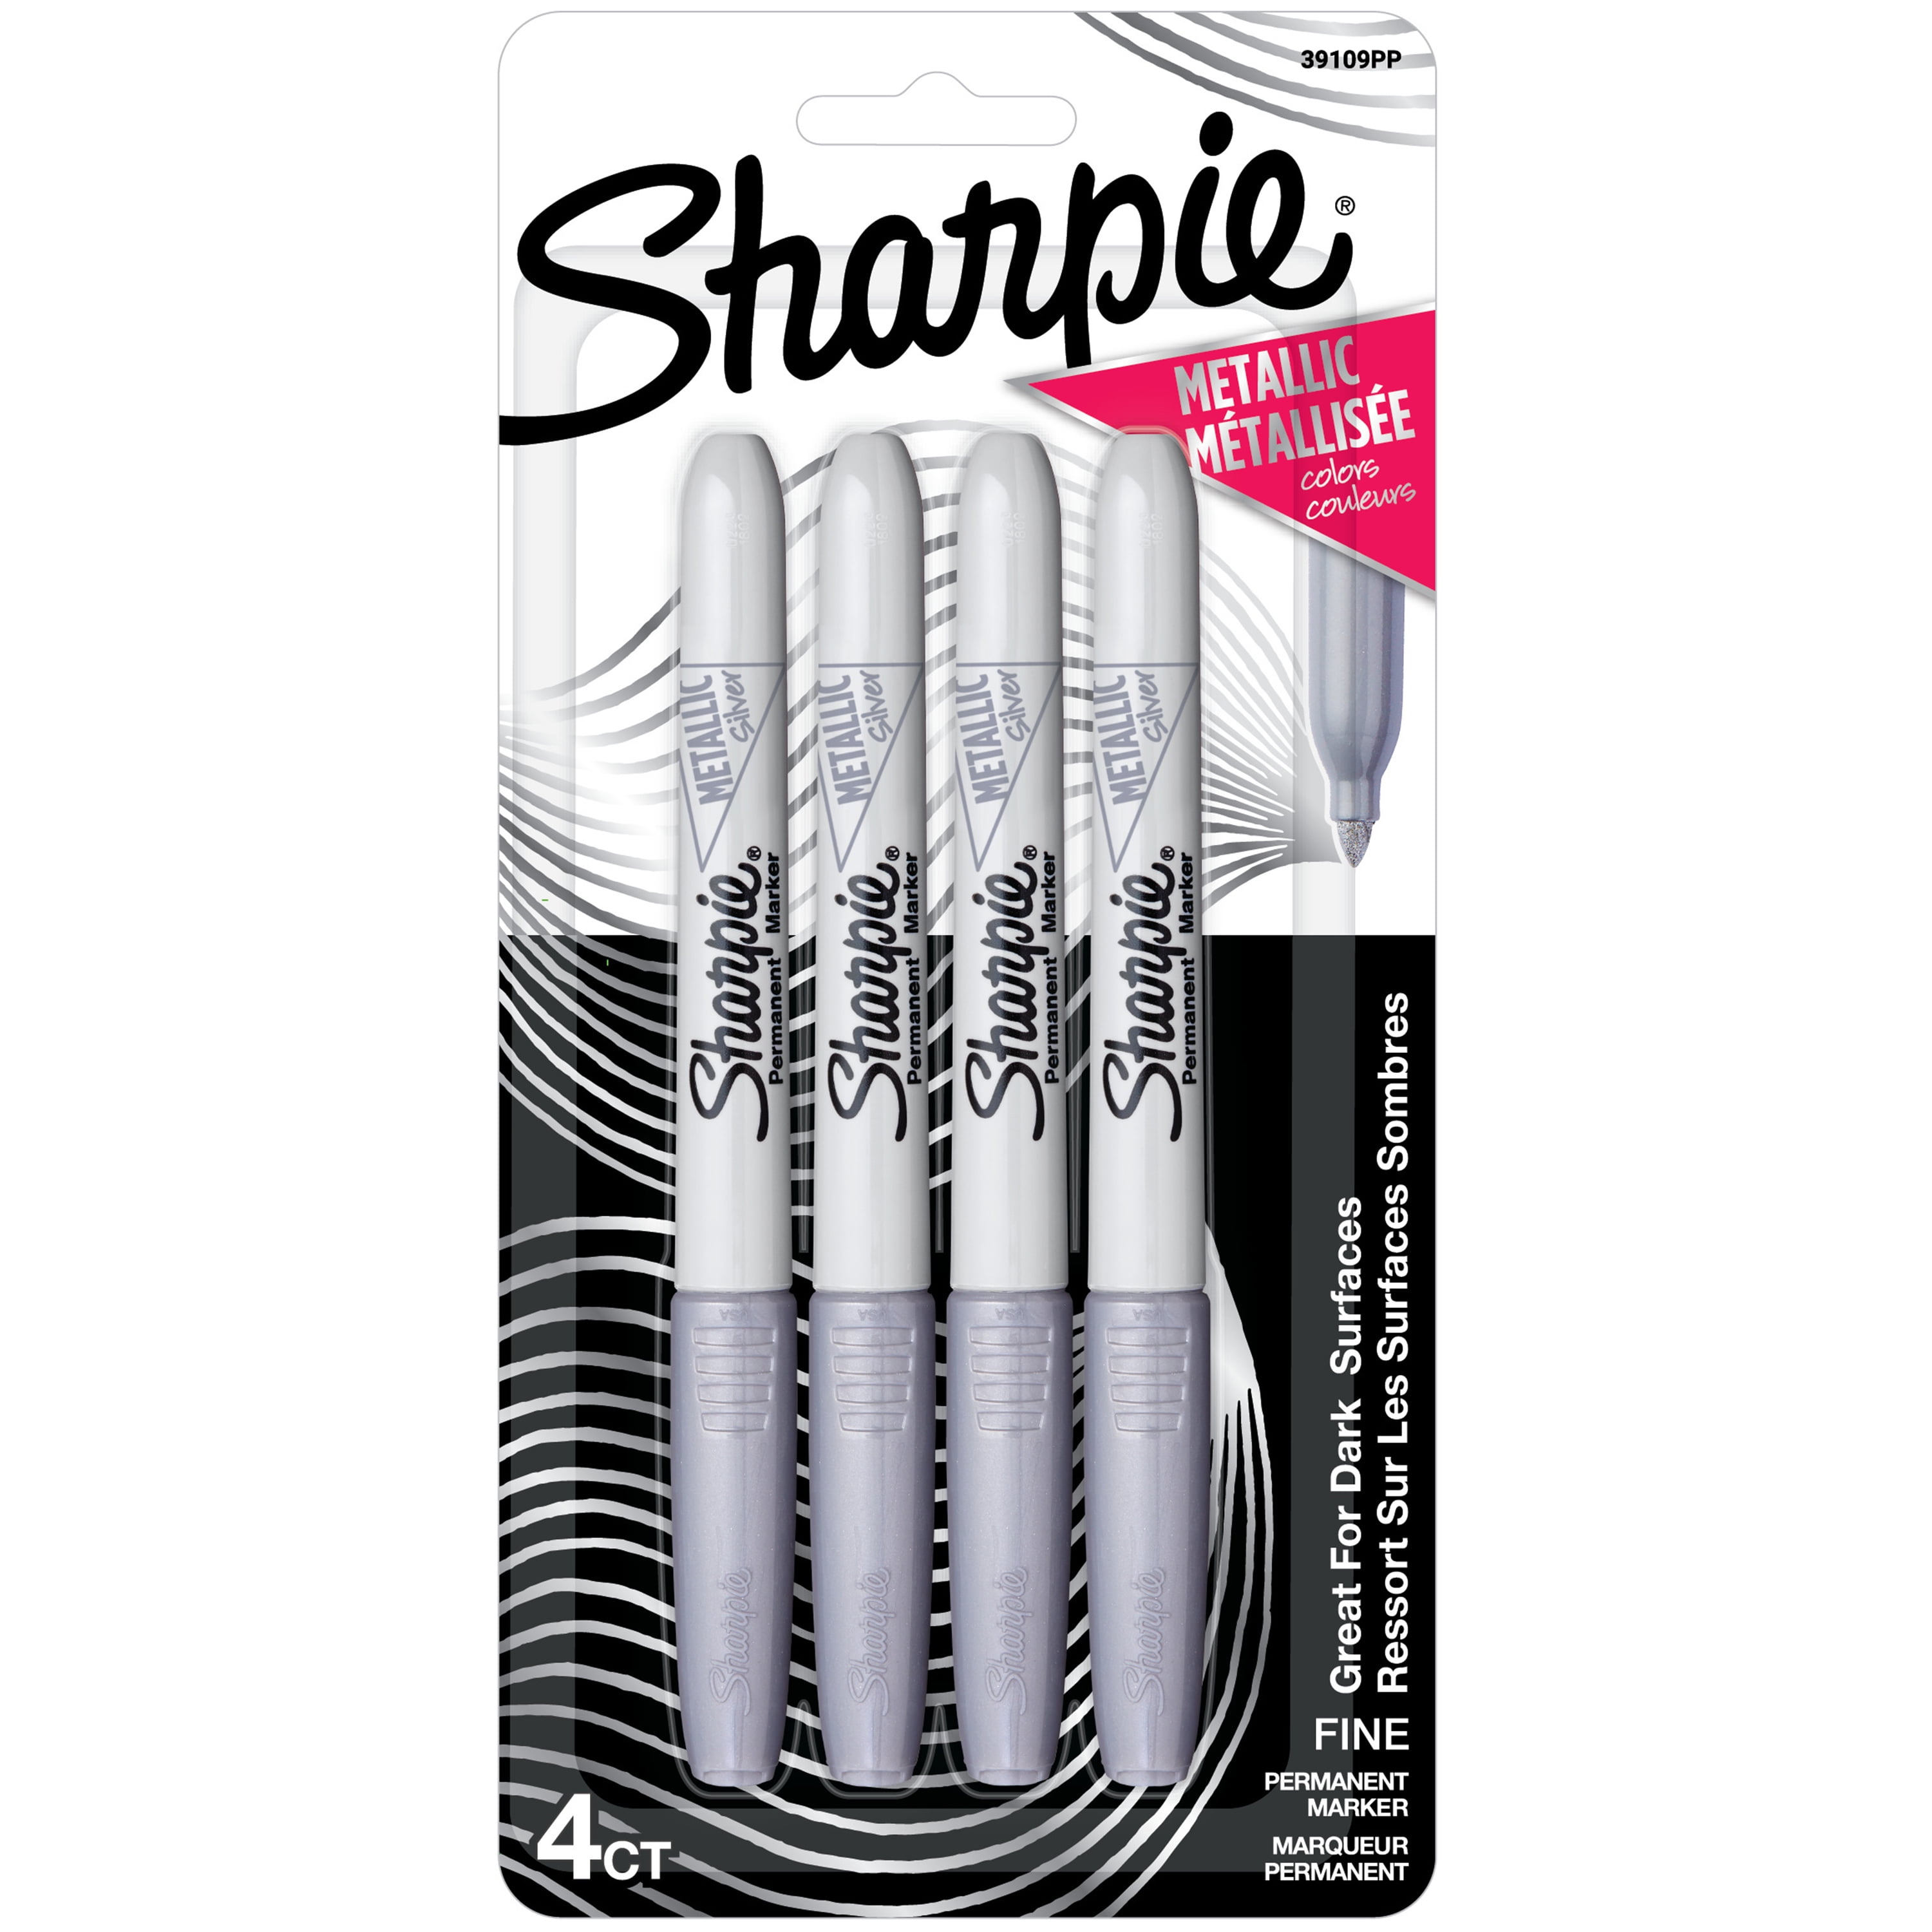 1 Blister Pack with Sharpie 39108PP Fine Point Metallic Silver Permanent Marker